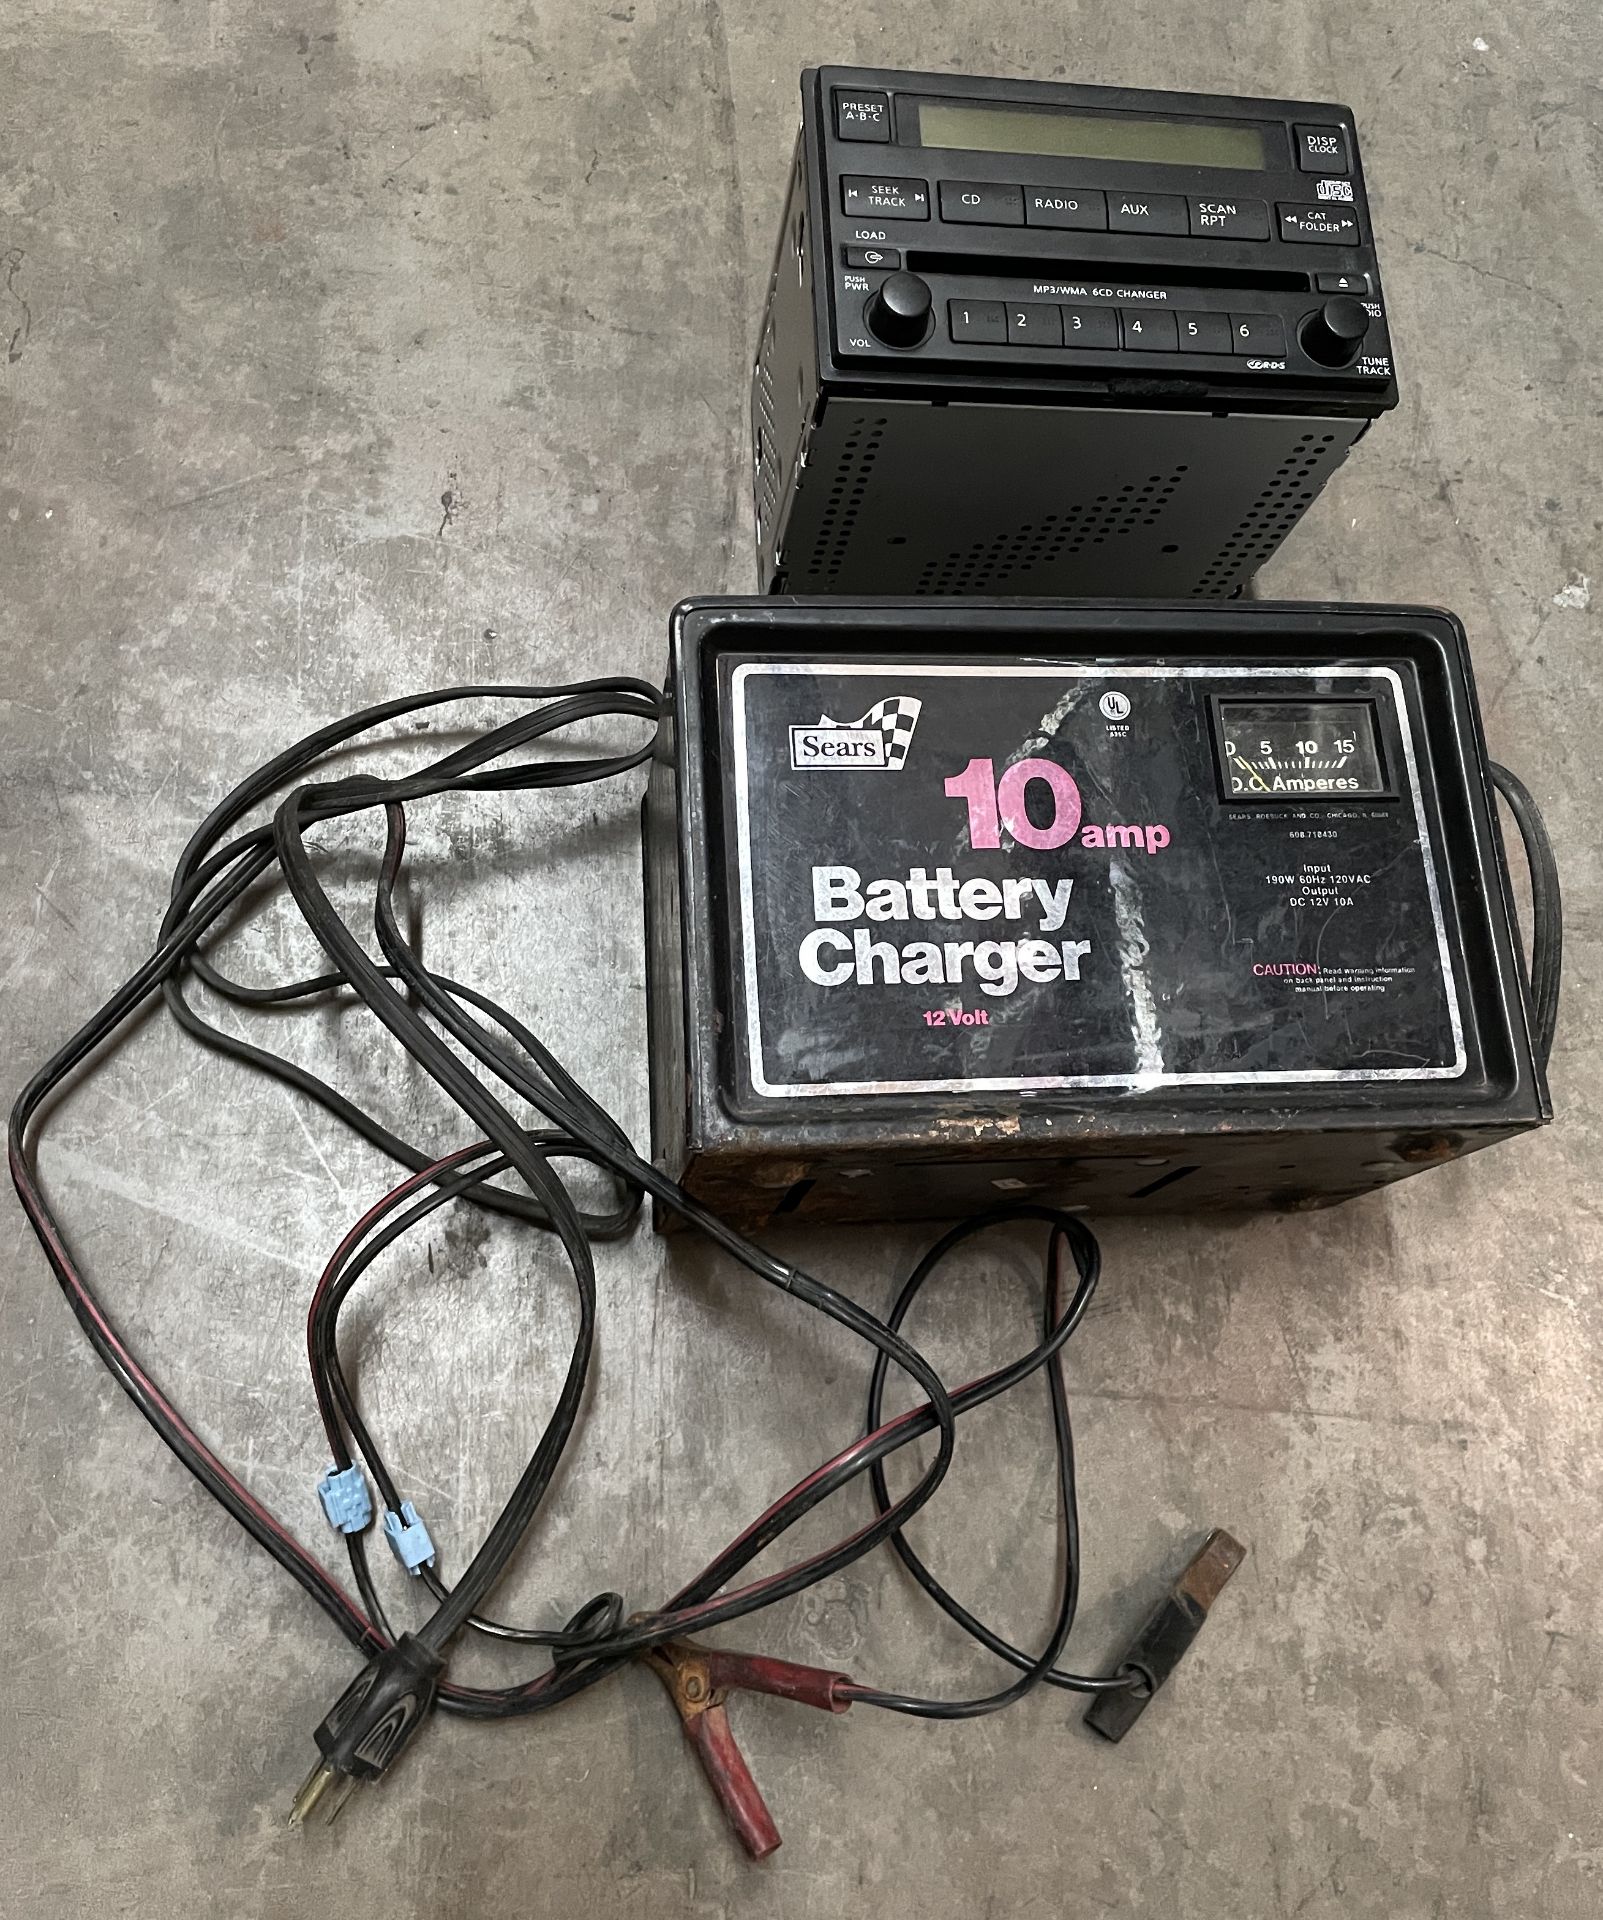 Battery Charger AND Car Radio Unit